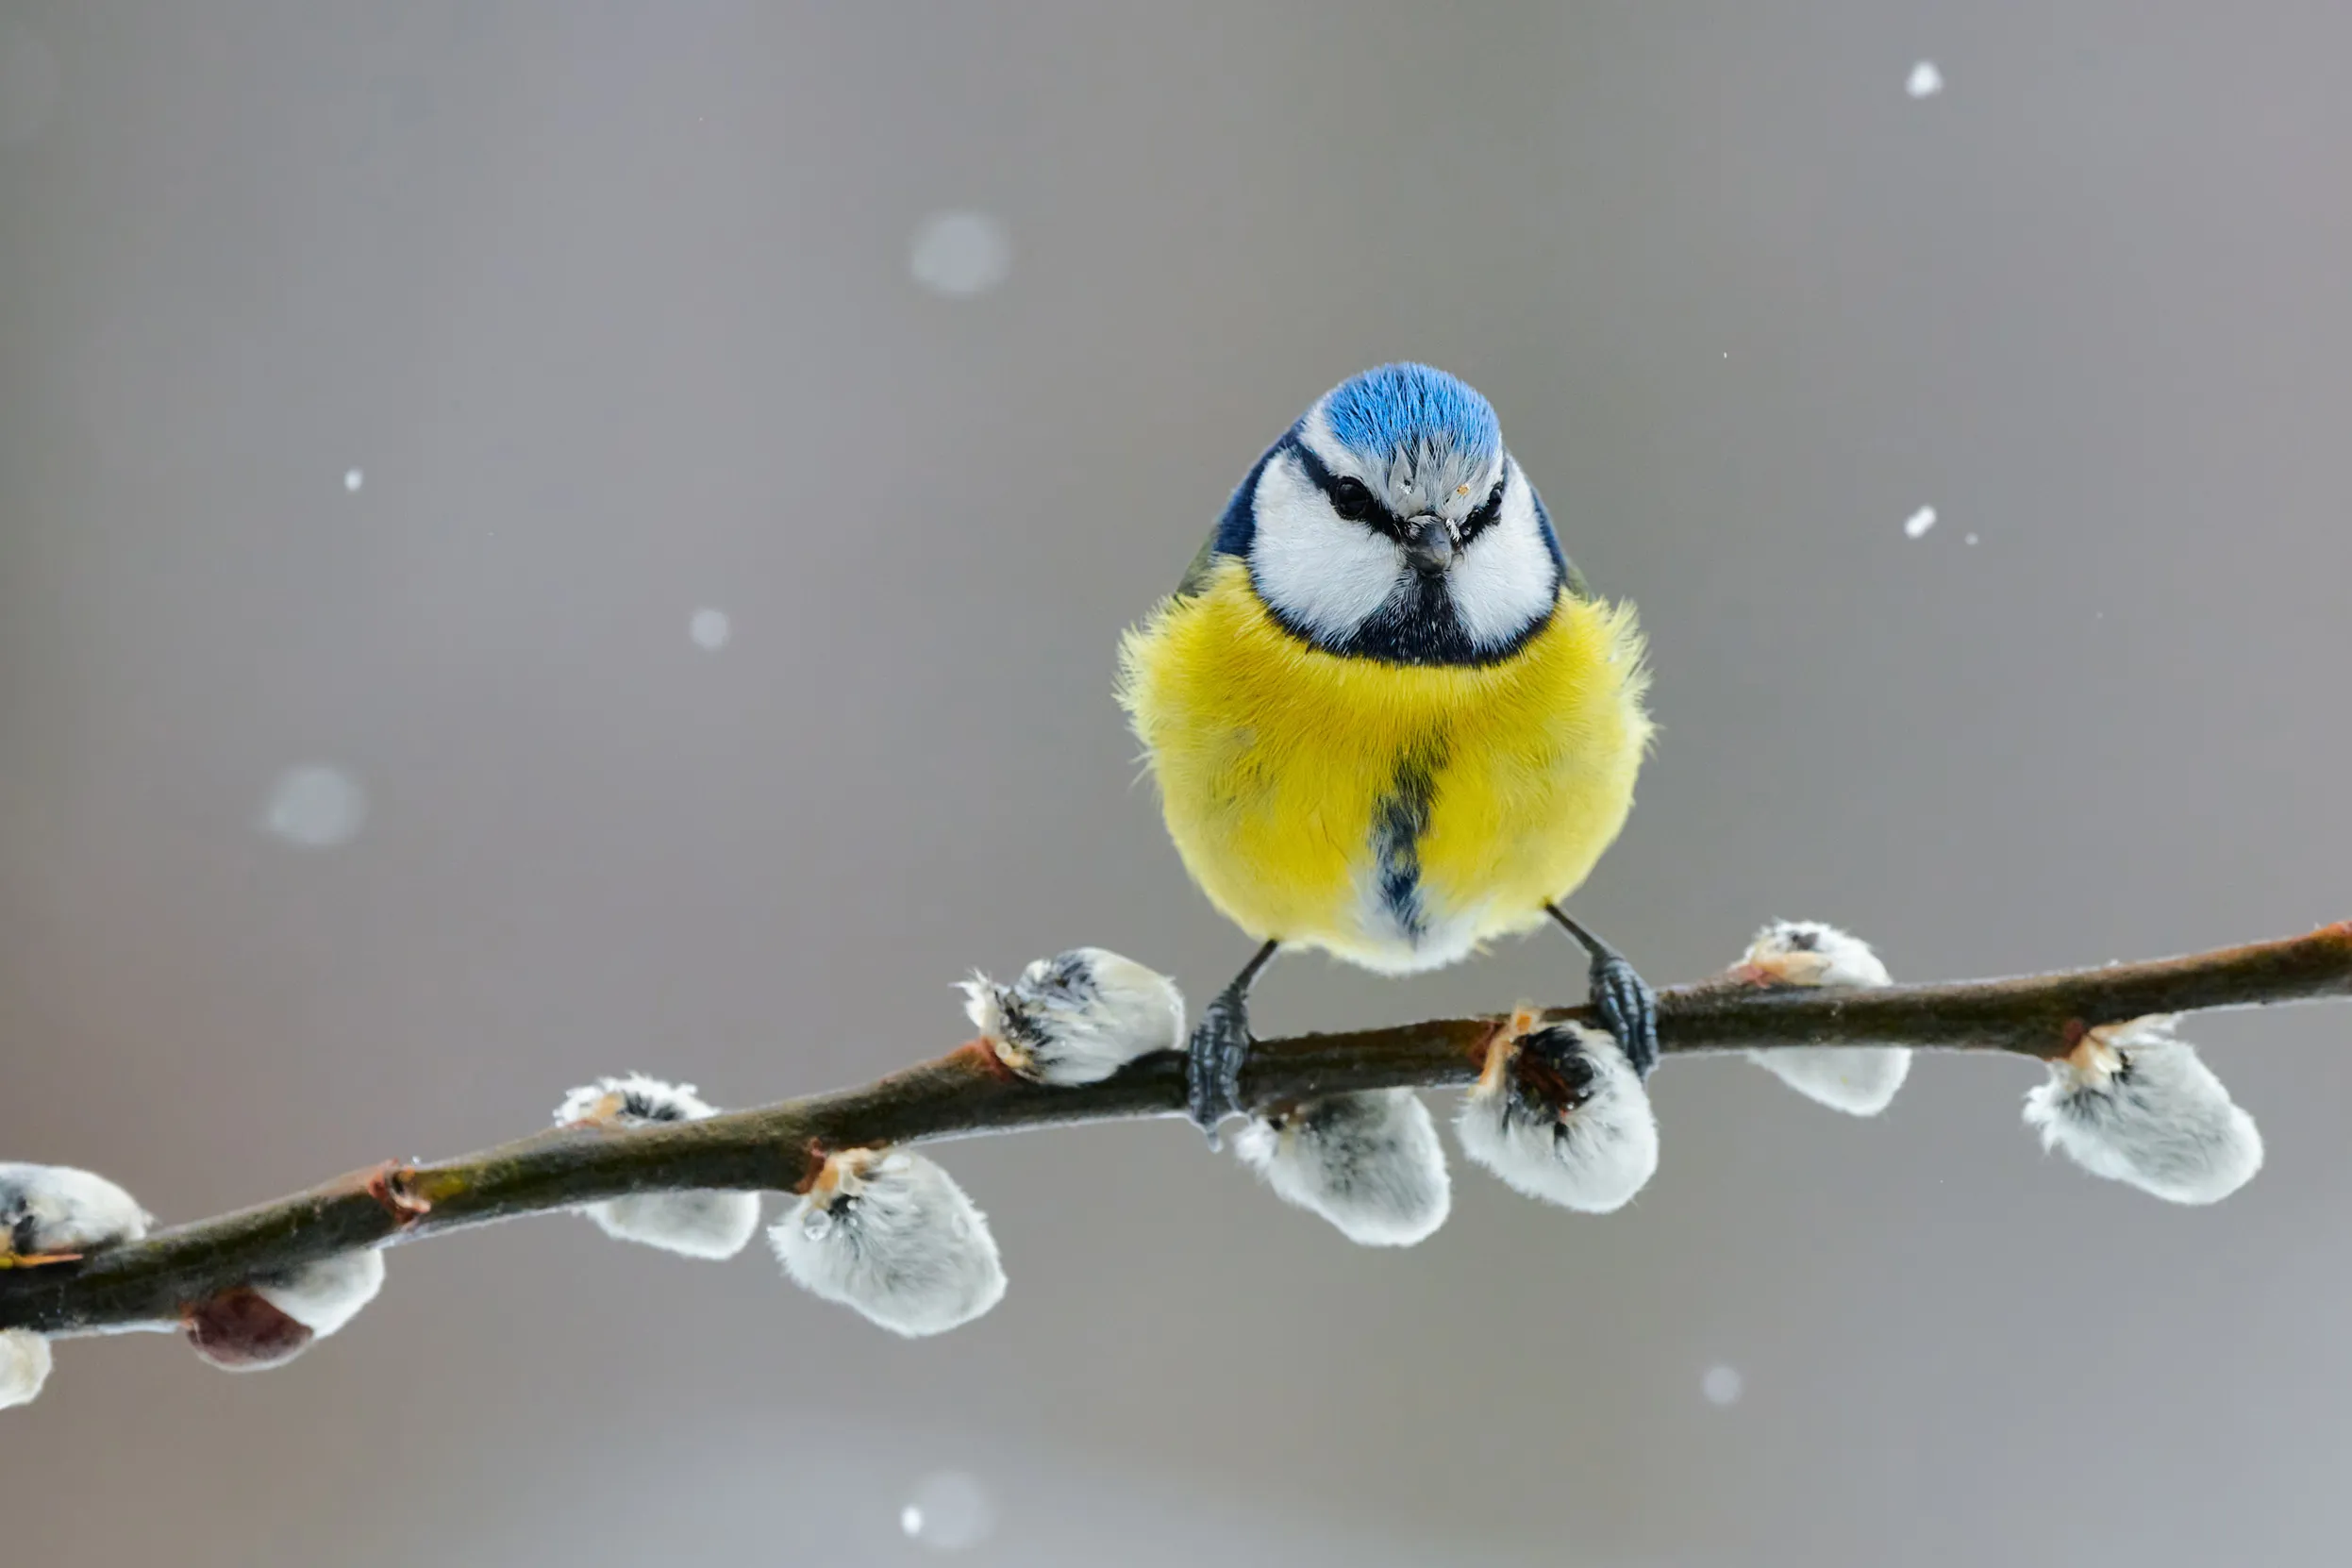 A lone Blue Tit perched on a branch as snow falls.